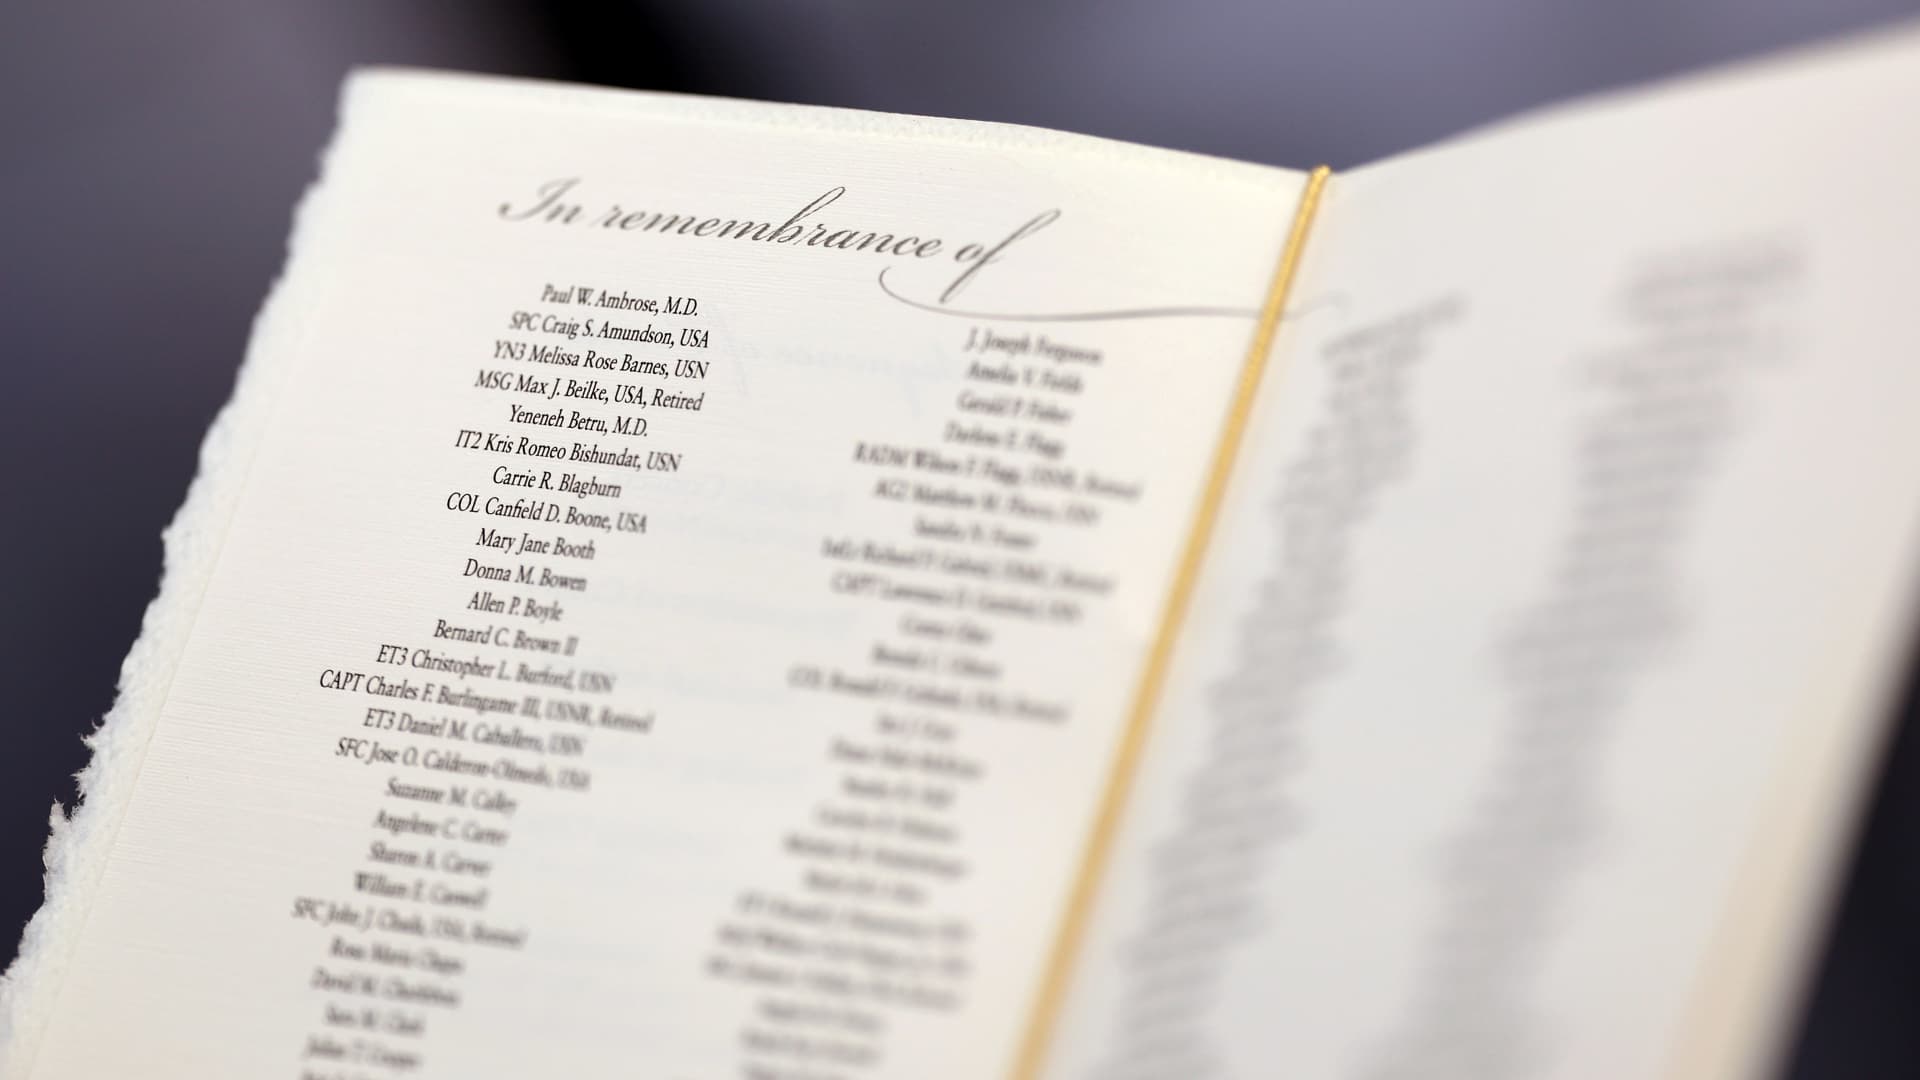 Victim's names are seen in a program during a ceremony observing the 22nd anniversary of the 9/11 terrorist attacks at the Pentagon, in Arlington, Virginia, Sept. 11, 2023.